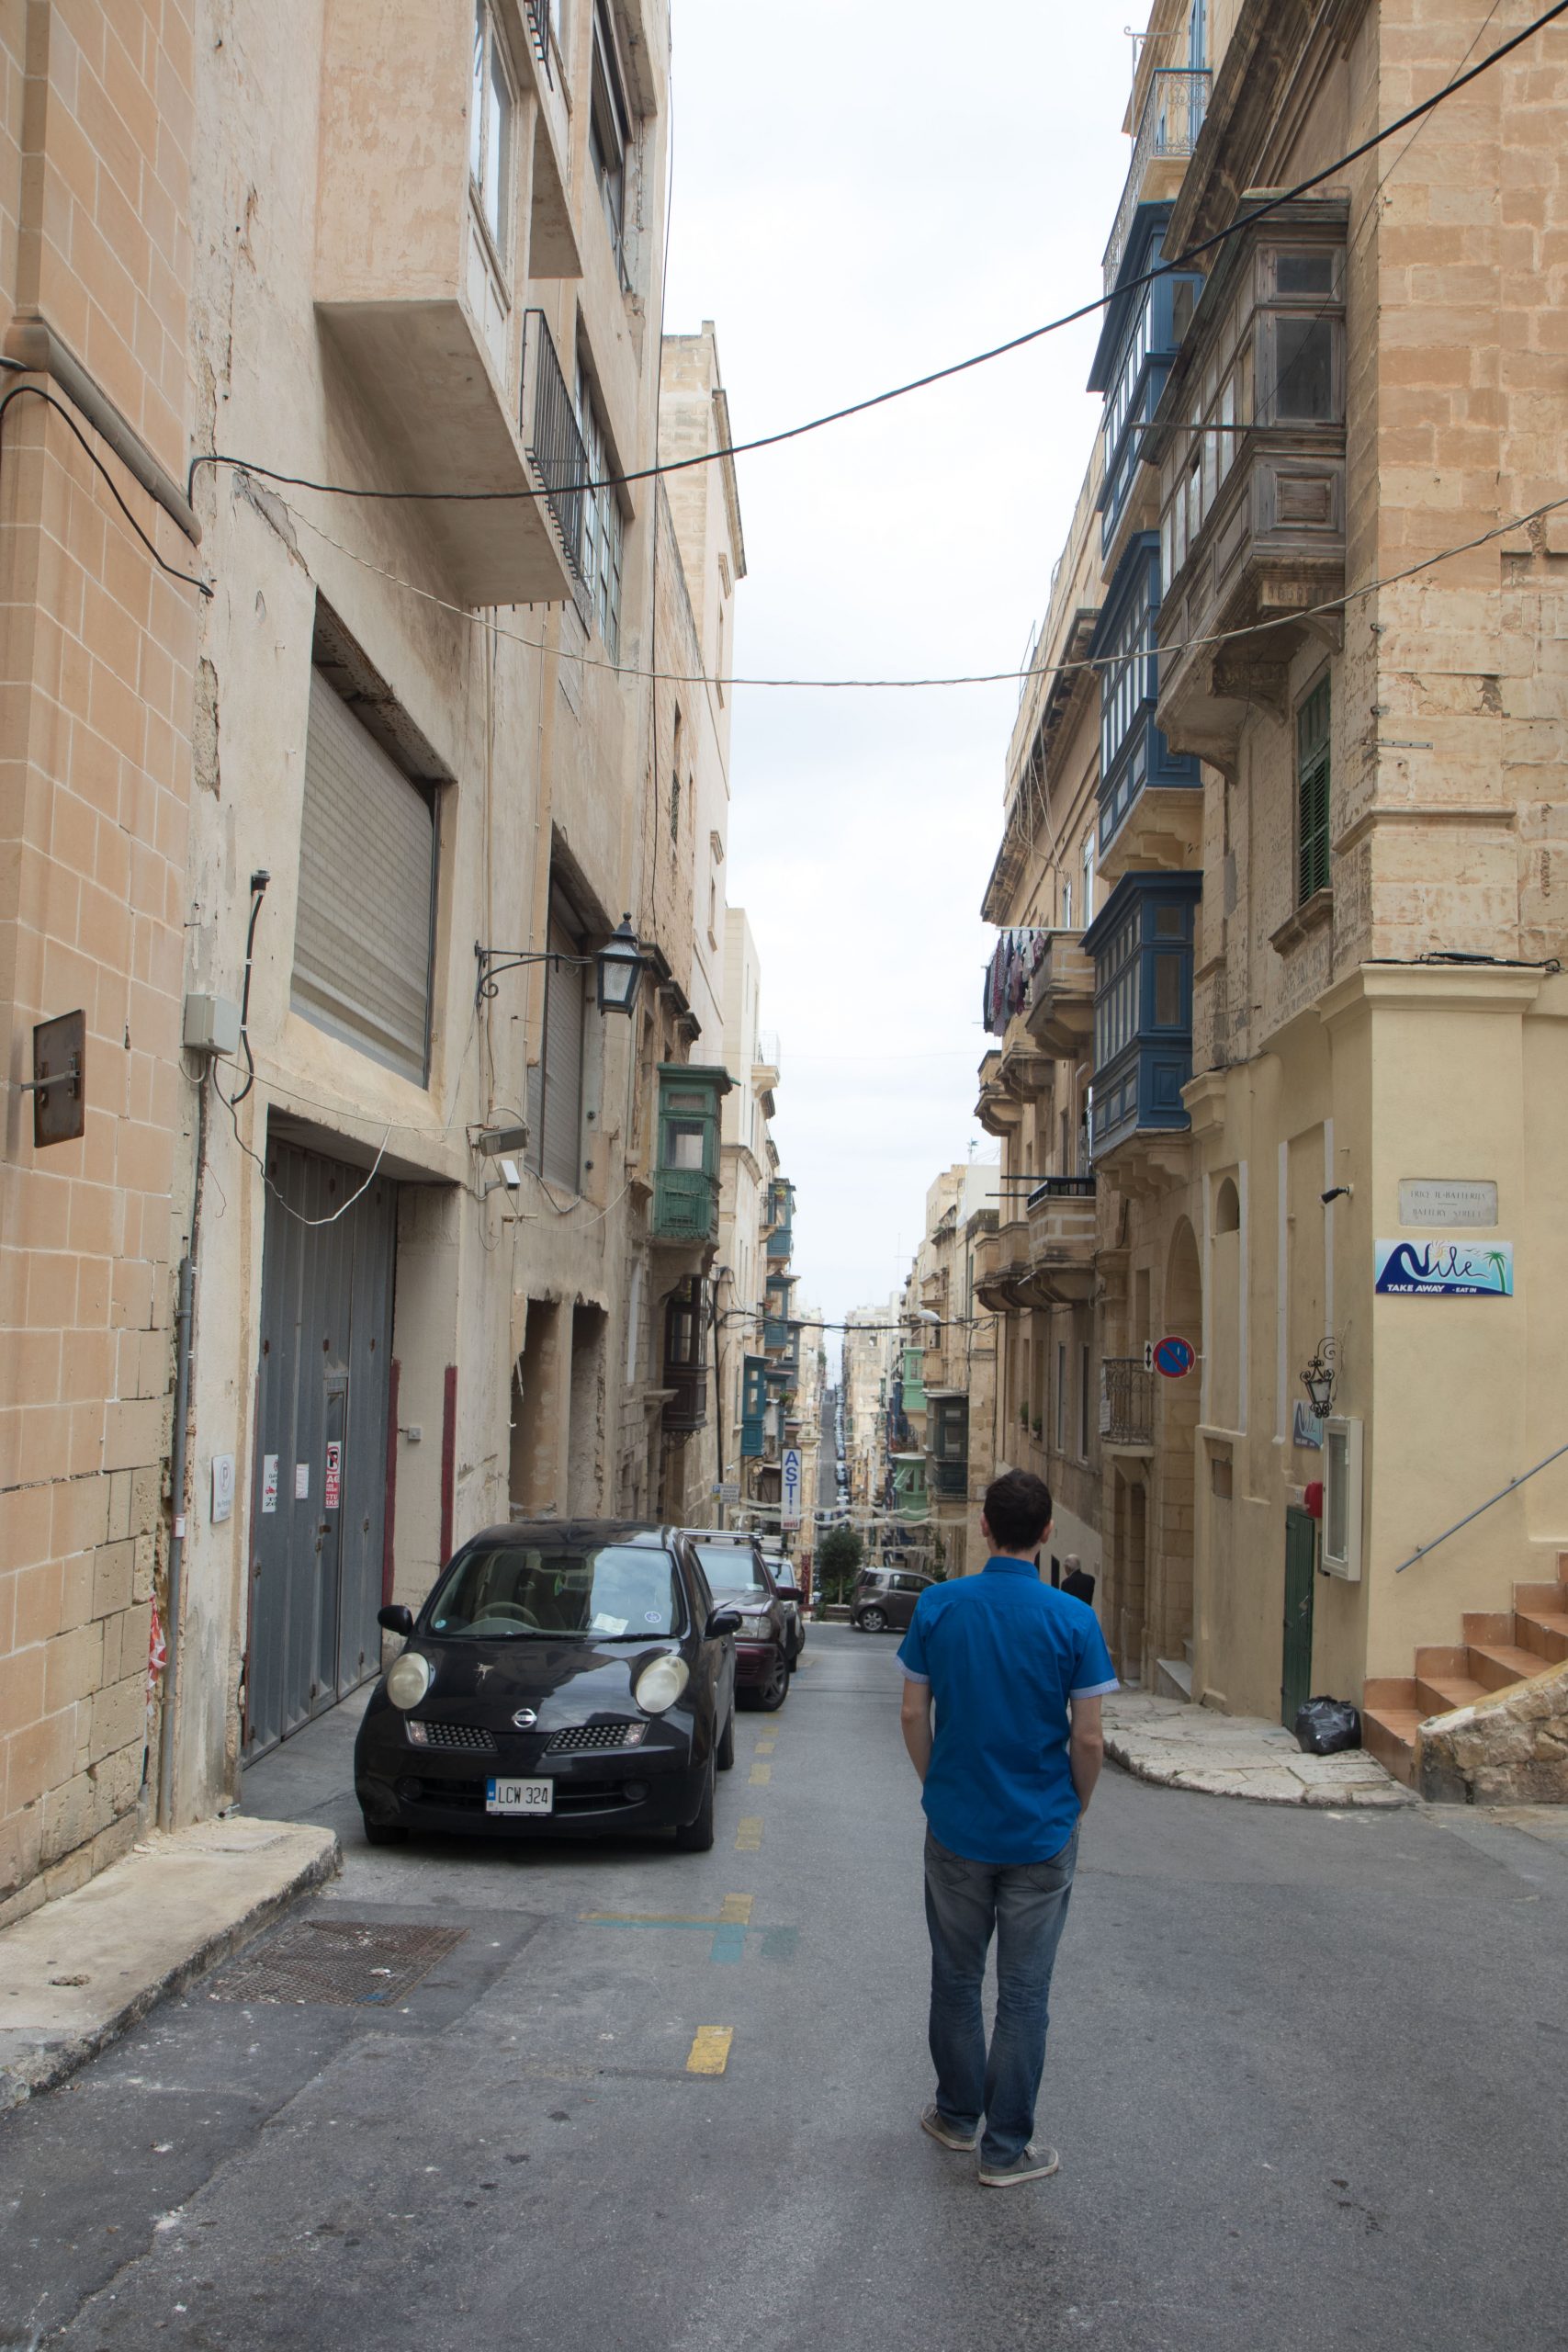 I'm not sure, why anyone would want to drive a car through these narrow streets.